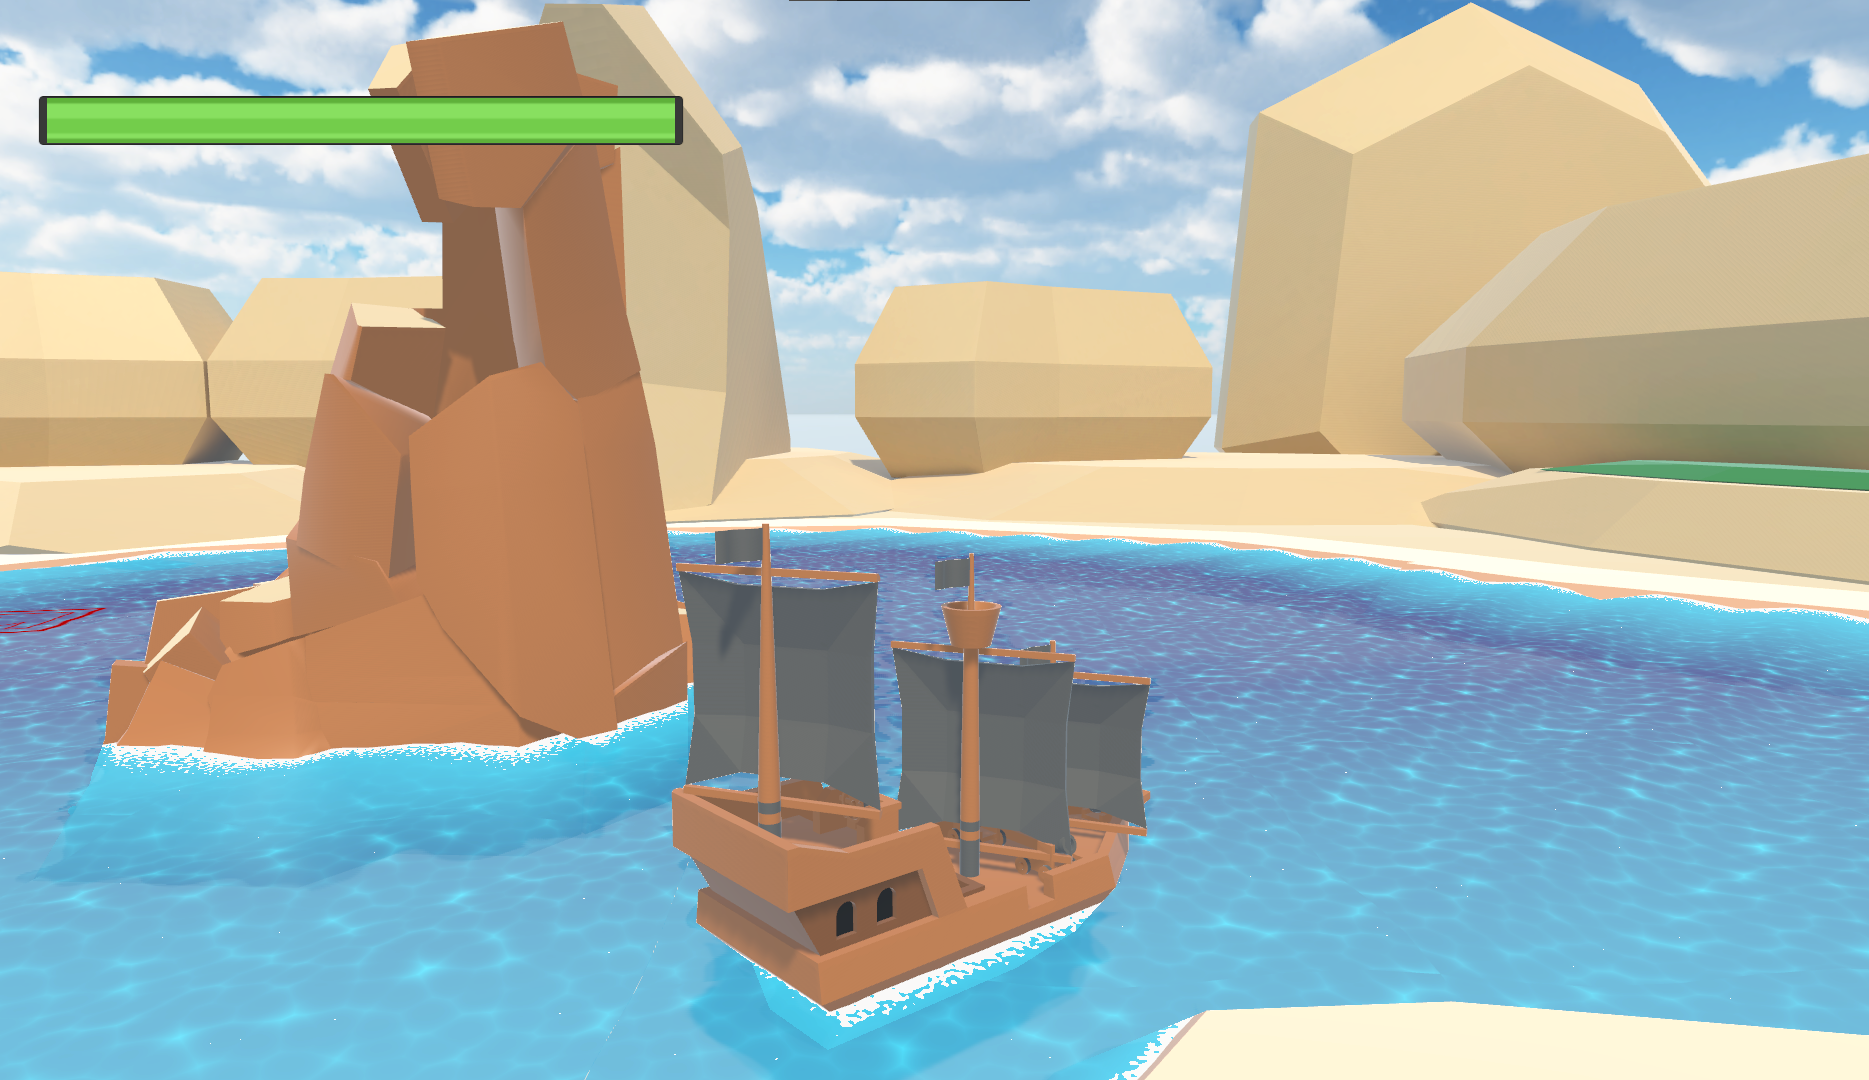 Pirate Jam by Julia Melgare, Diogo Müller for Kenney Jam 2021 itch.io